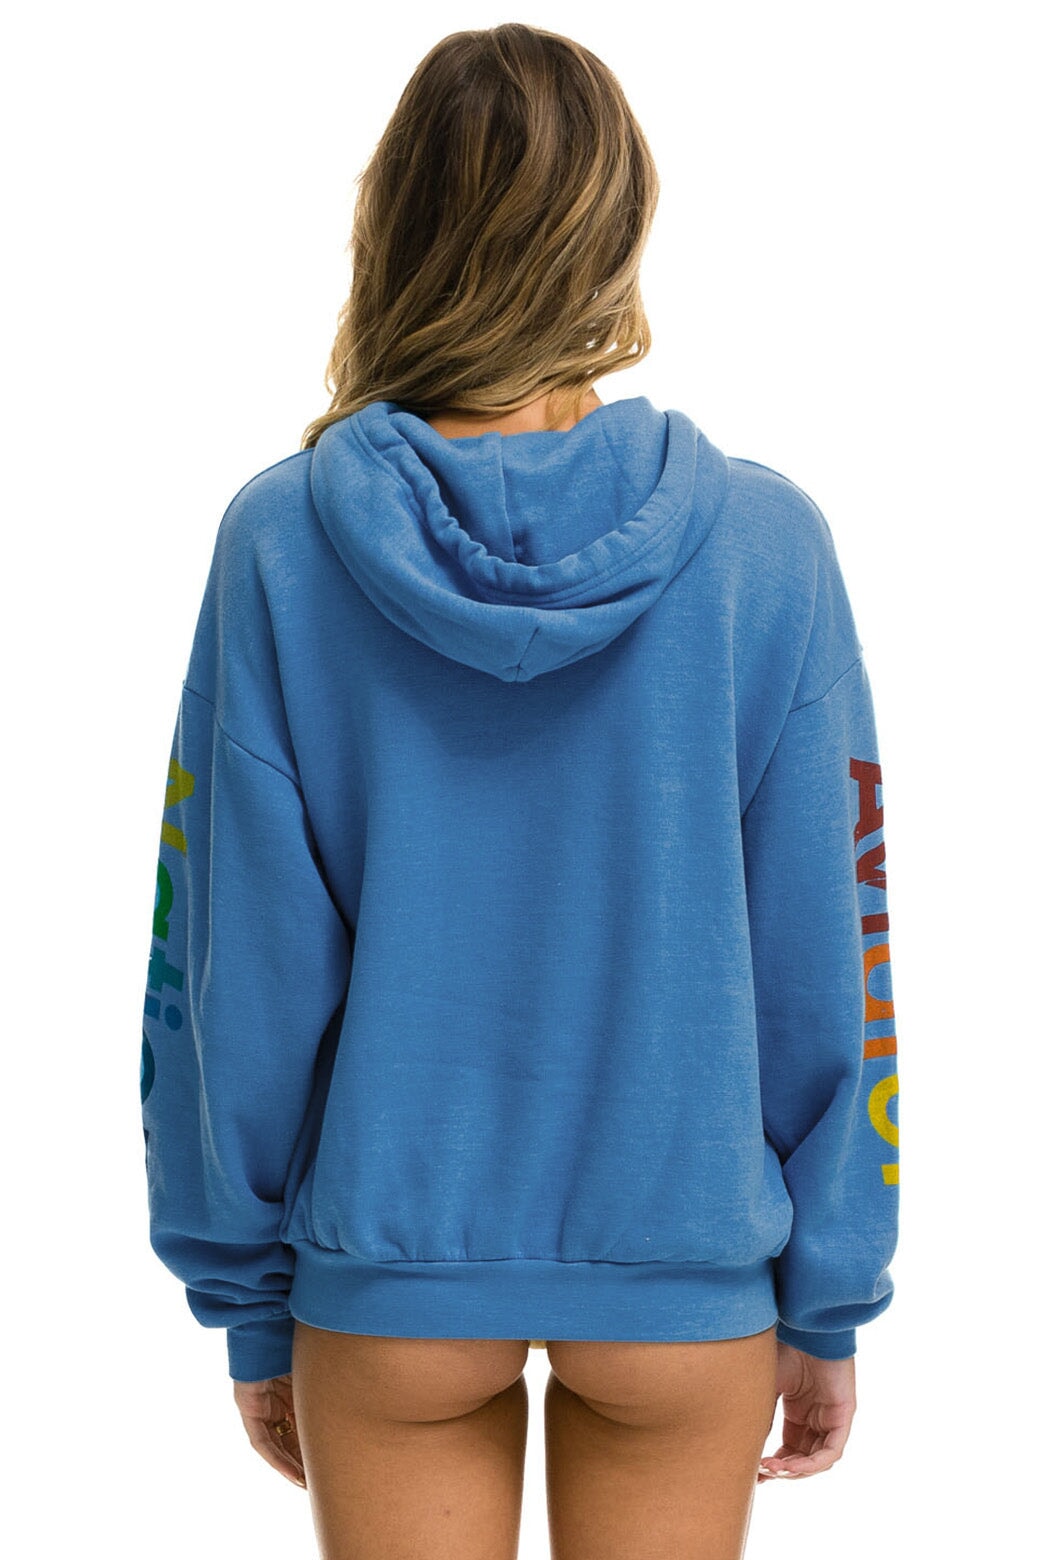 AVIATOR NATION RELAXED PULLOVER HOODIE - COBALT Hoodie Aviator Nation 